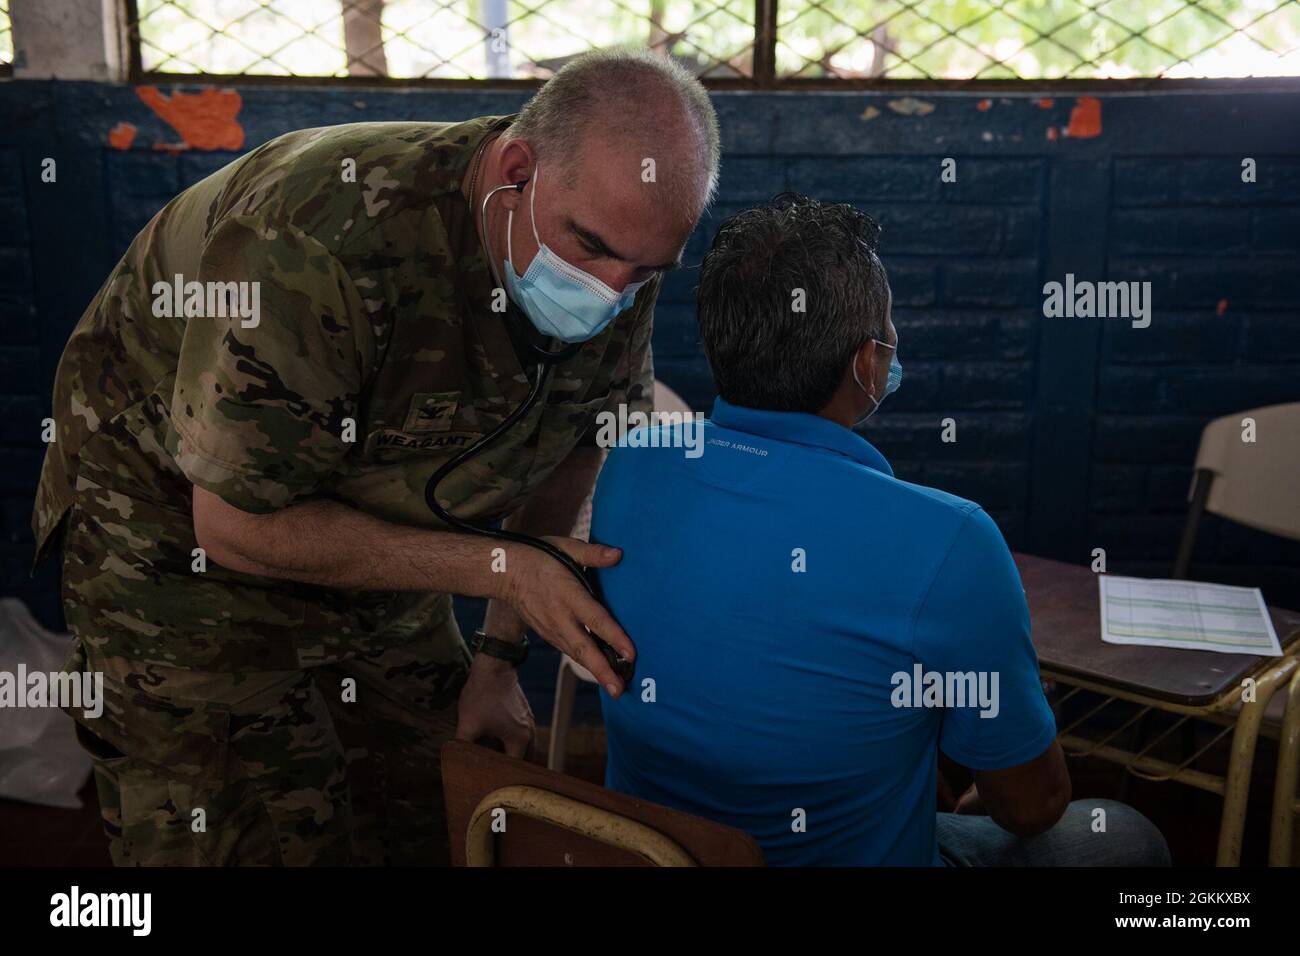 U.S. Army Col. Lance Weagant, a medical provider with the Medical Element, Joint Task Force-Bravo (JTF-B), Soto Cano Air Base, Honduras, treats a Salvadoran patient during a medical readiness training exercise for Resolute Sentinel 21 in El Jaguey, El Salvador, May 20, 2021. Resolute Sentinel 21 is a training opportunity with real-world benefits to increase Joint Task Force-Bravo’s medical and operational readiness while helping local citizens in El Salvador. Stock Photo